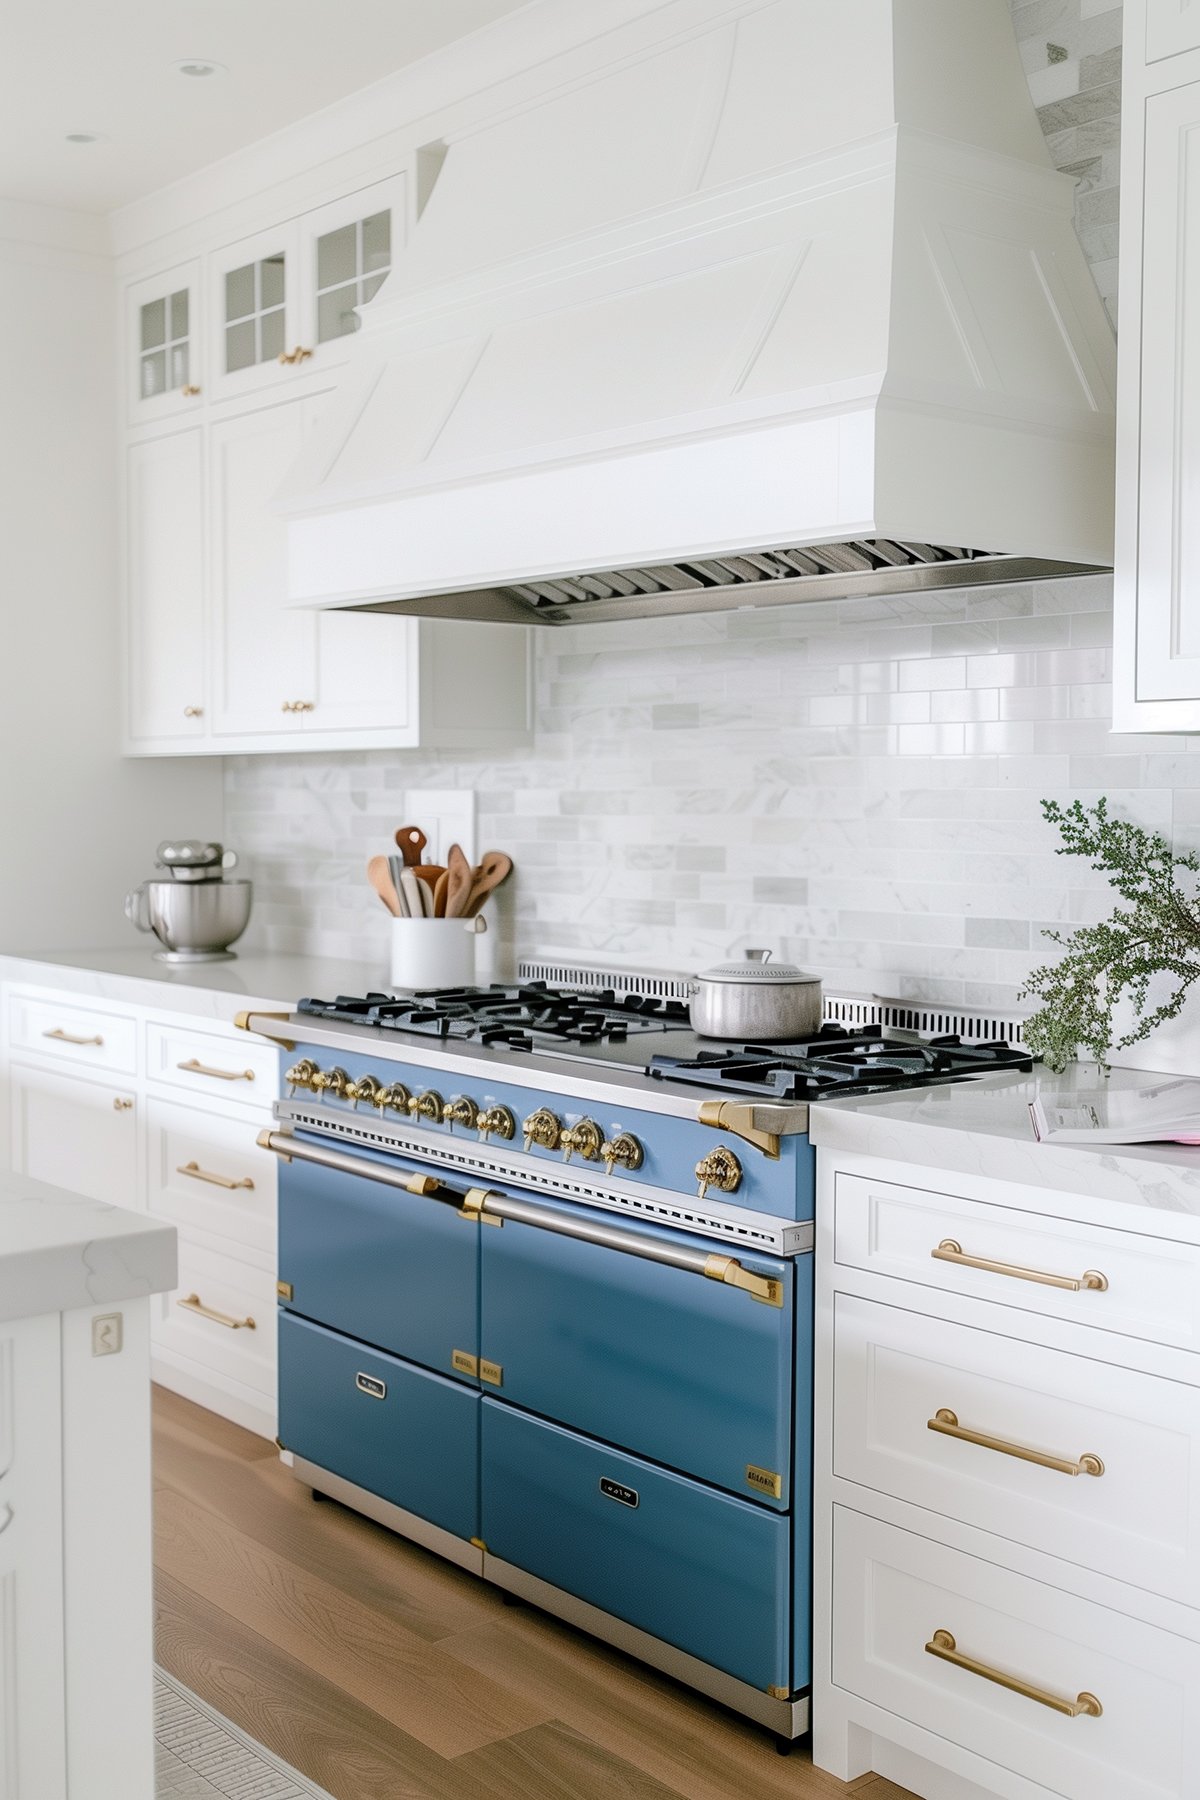 11 Ways to Add Color to a White Kitchen